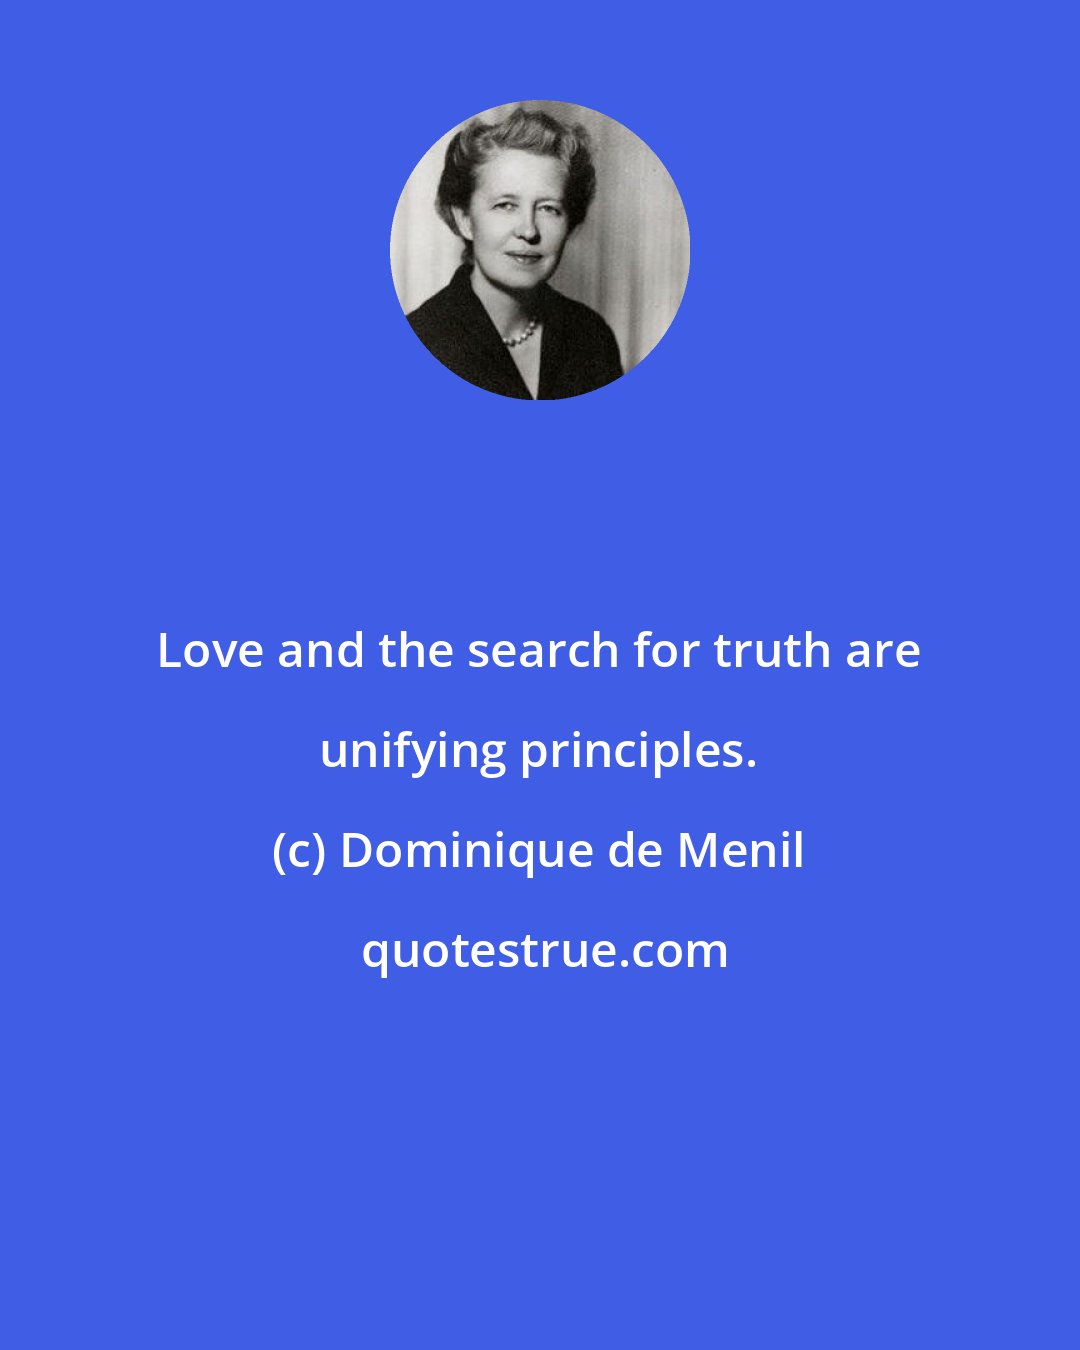 Dominique de Menil: Love and the search for truth are unifying principles.